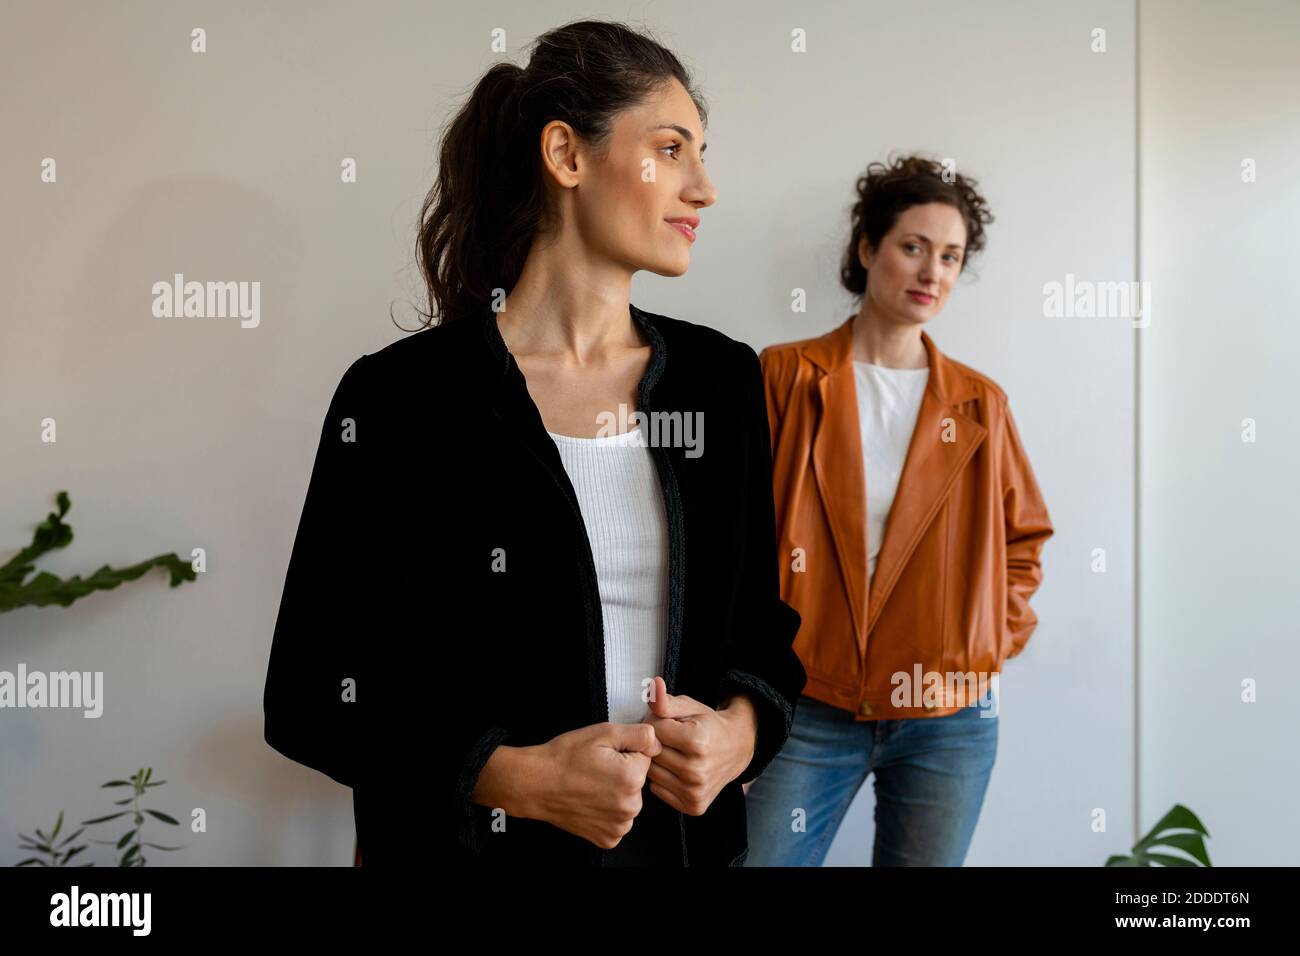 Female models wearing jacket standing against wall at home Stock Photo